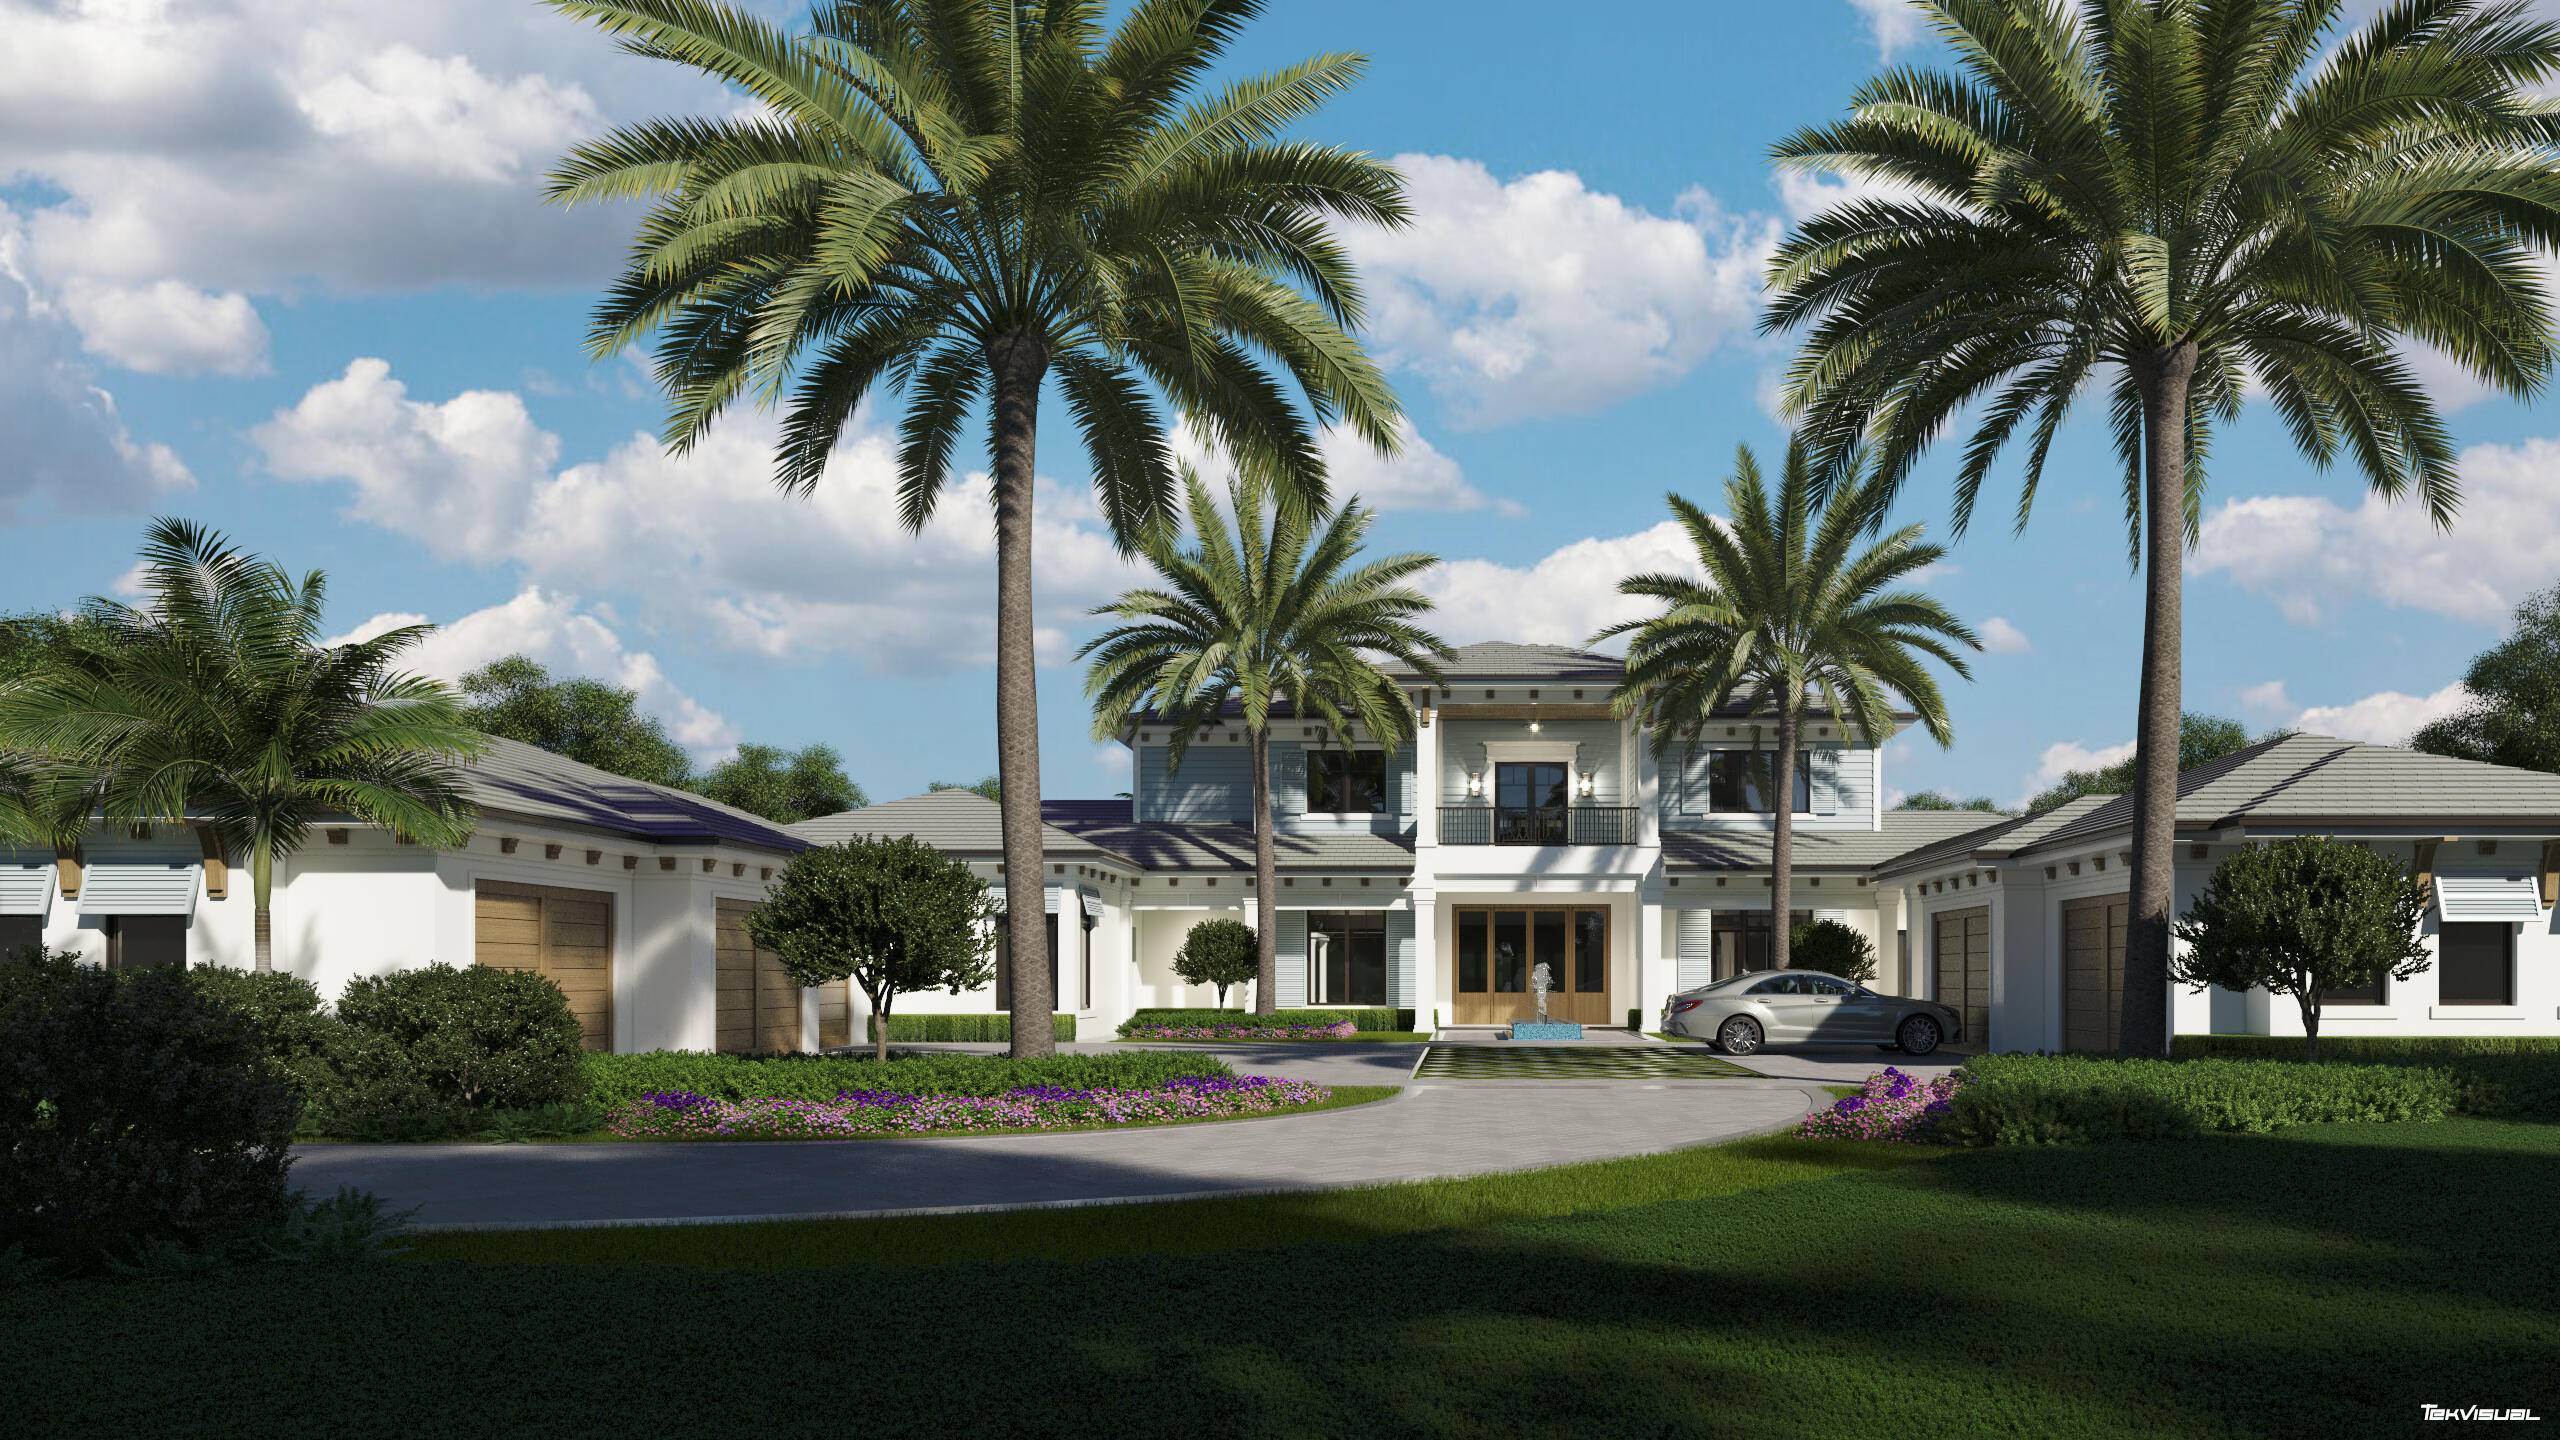 Brand new, Loxahatchee Riverfront Custom Estate A private gated driveway leads you to this magnificent custom estate on the Loxahatchee River with 100 feet of prime riverfront property on over ...